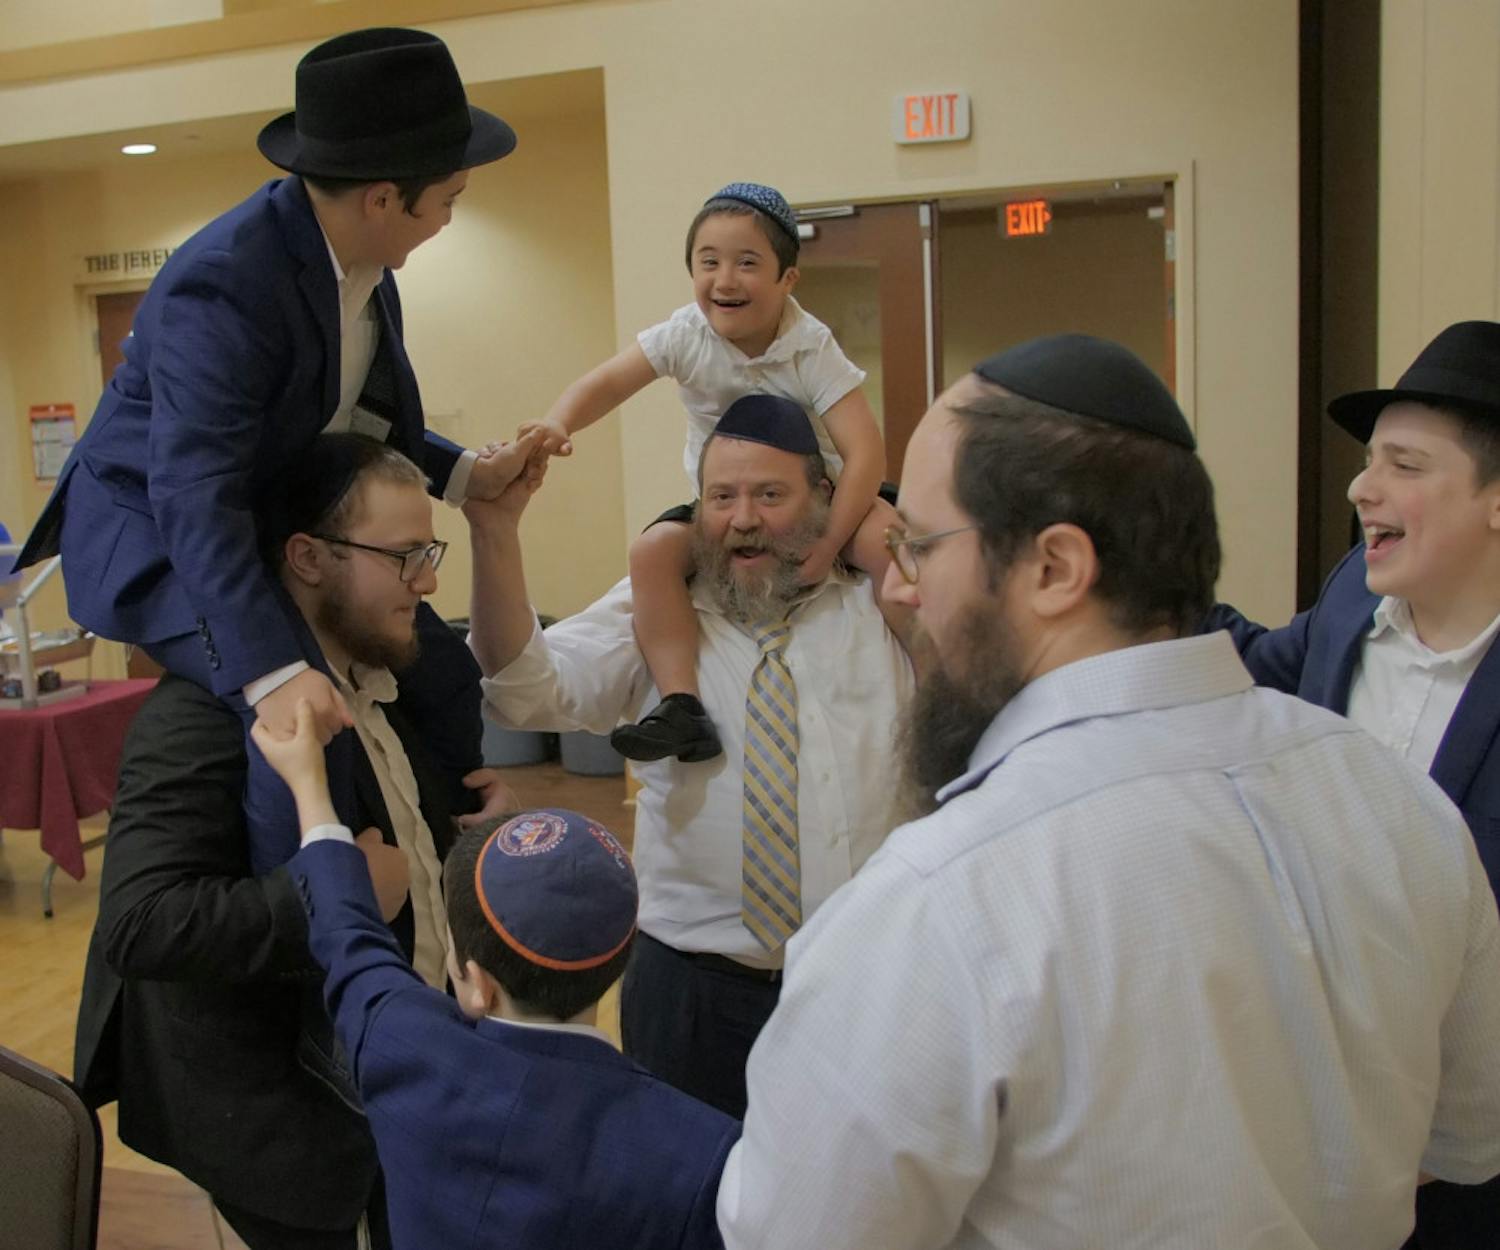 Shmueli Goldman, 13, and his relatives celebrate after he completes his recitation of Jewish law in both Yiddish and Hebrew. His family started dancing in a circle and continued dancing around the room.